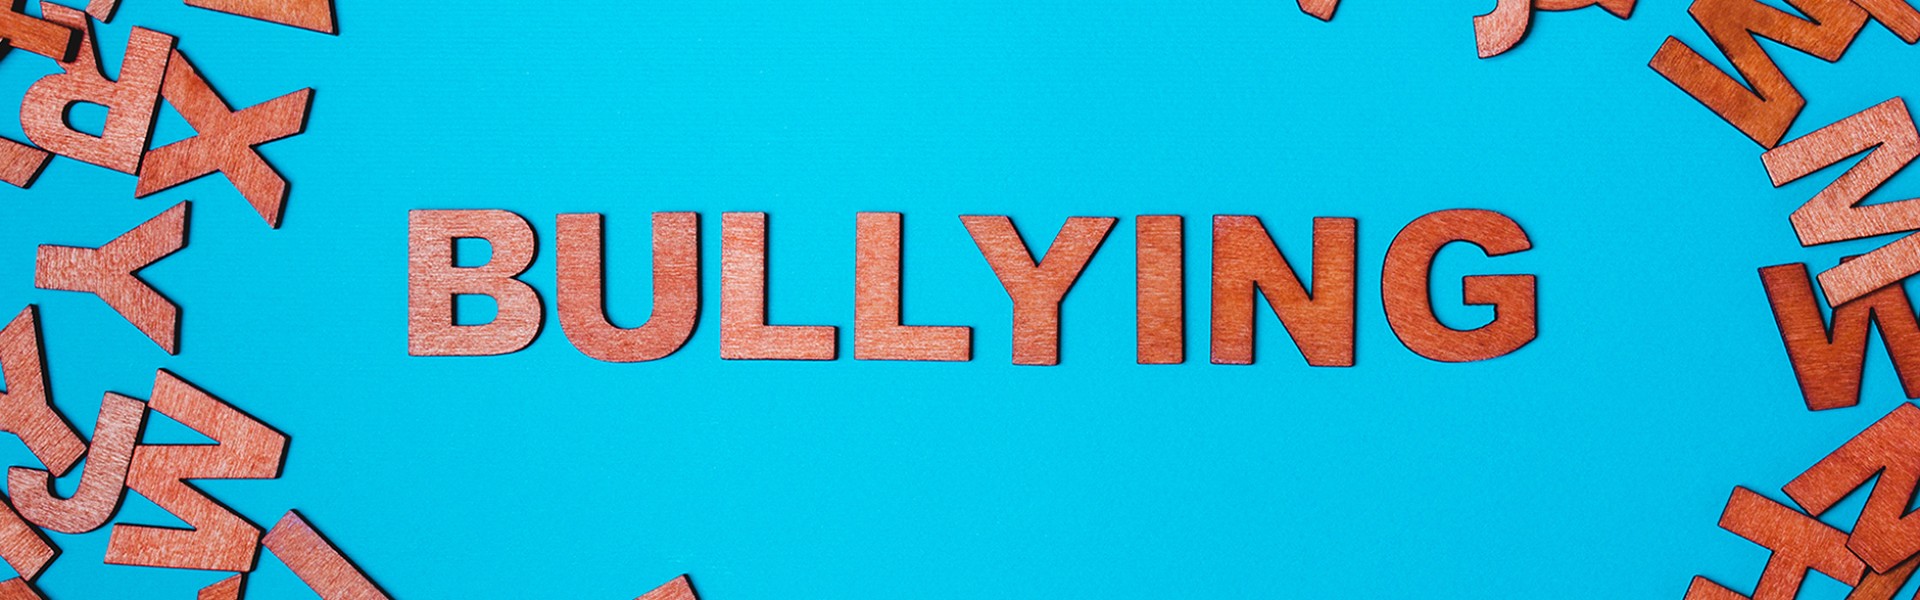 Bullying spelled out in wooden letters